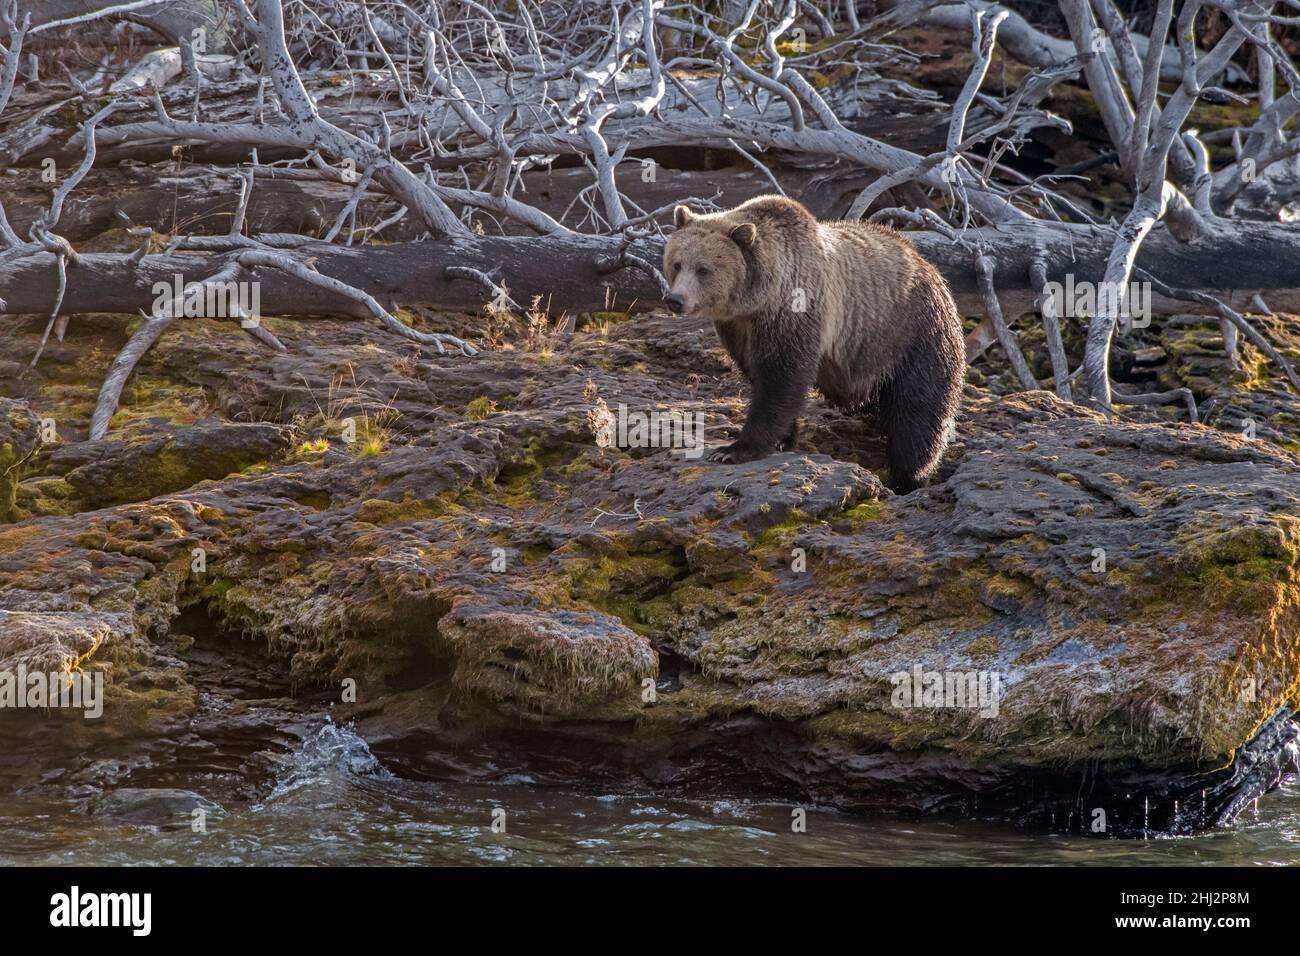 Grizzly Bear (Ursus arctos) along the shore of Yellowstone Lake. October in Yellowstone National Park, Wyoming, USA. Stock Photo